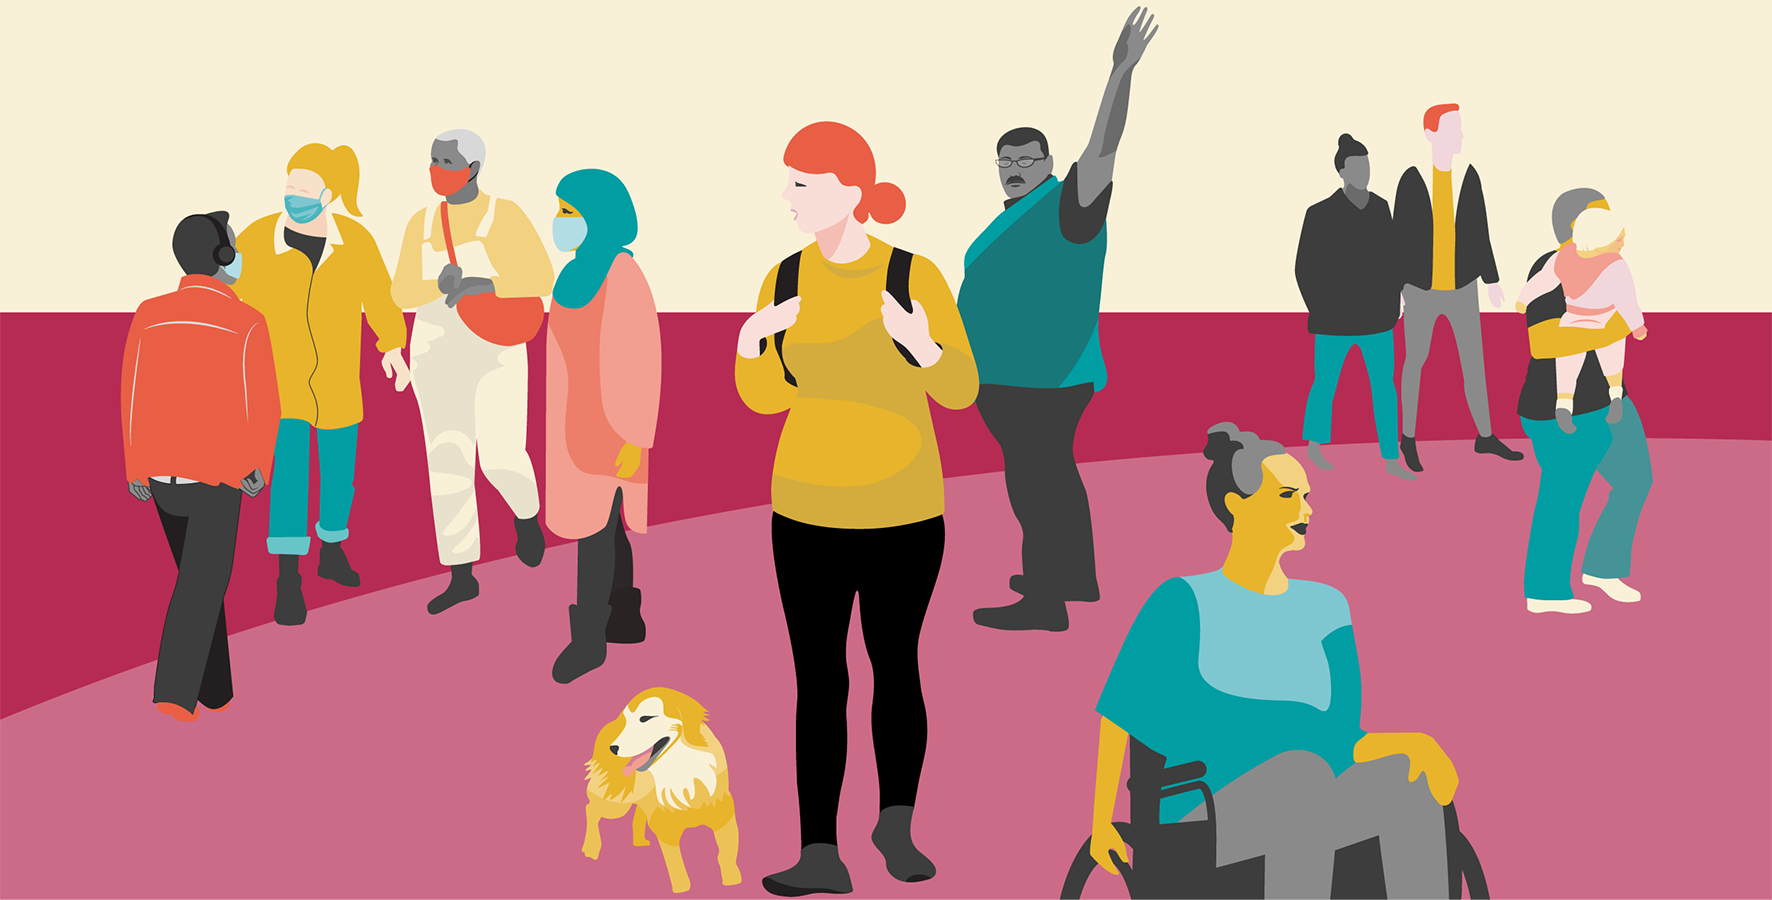 Illustration for a menu tab and header. A mixed community walk, gather, and meet.